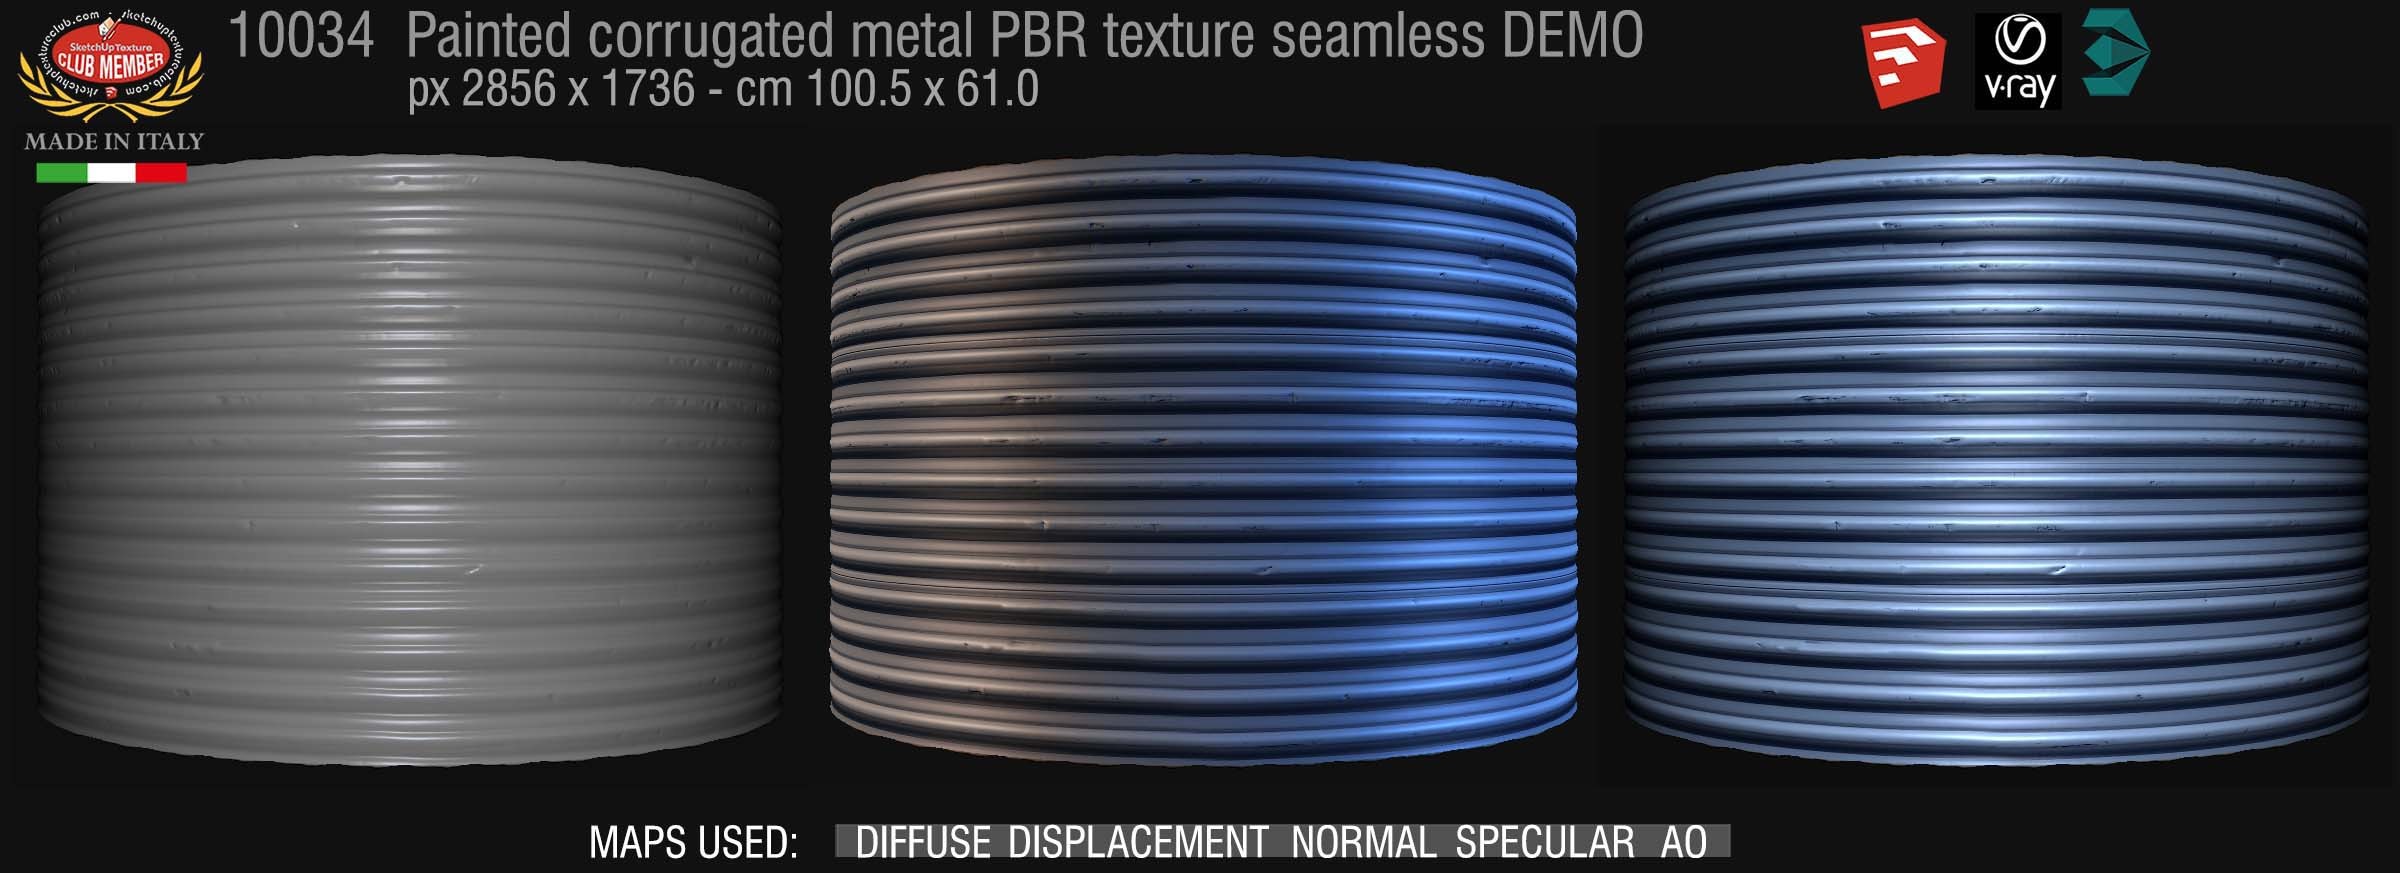 10034 Painted corrugated metal PBR texture seamless DEMO